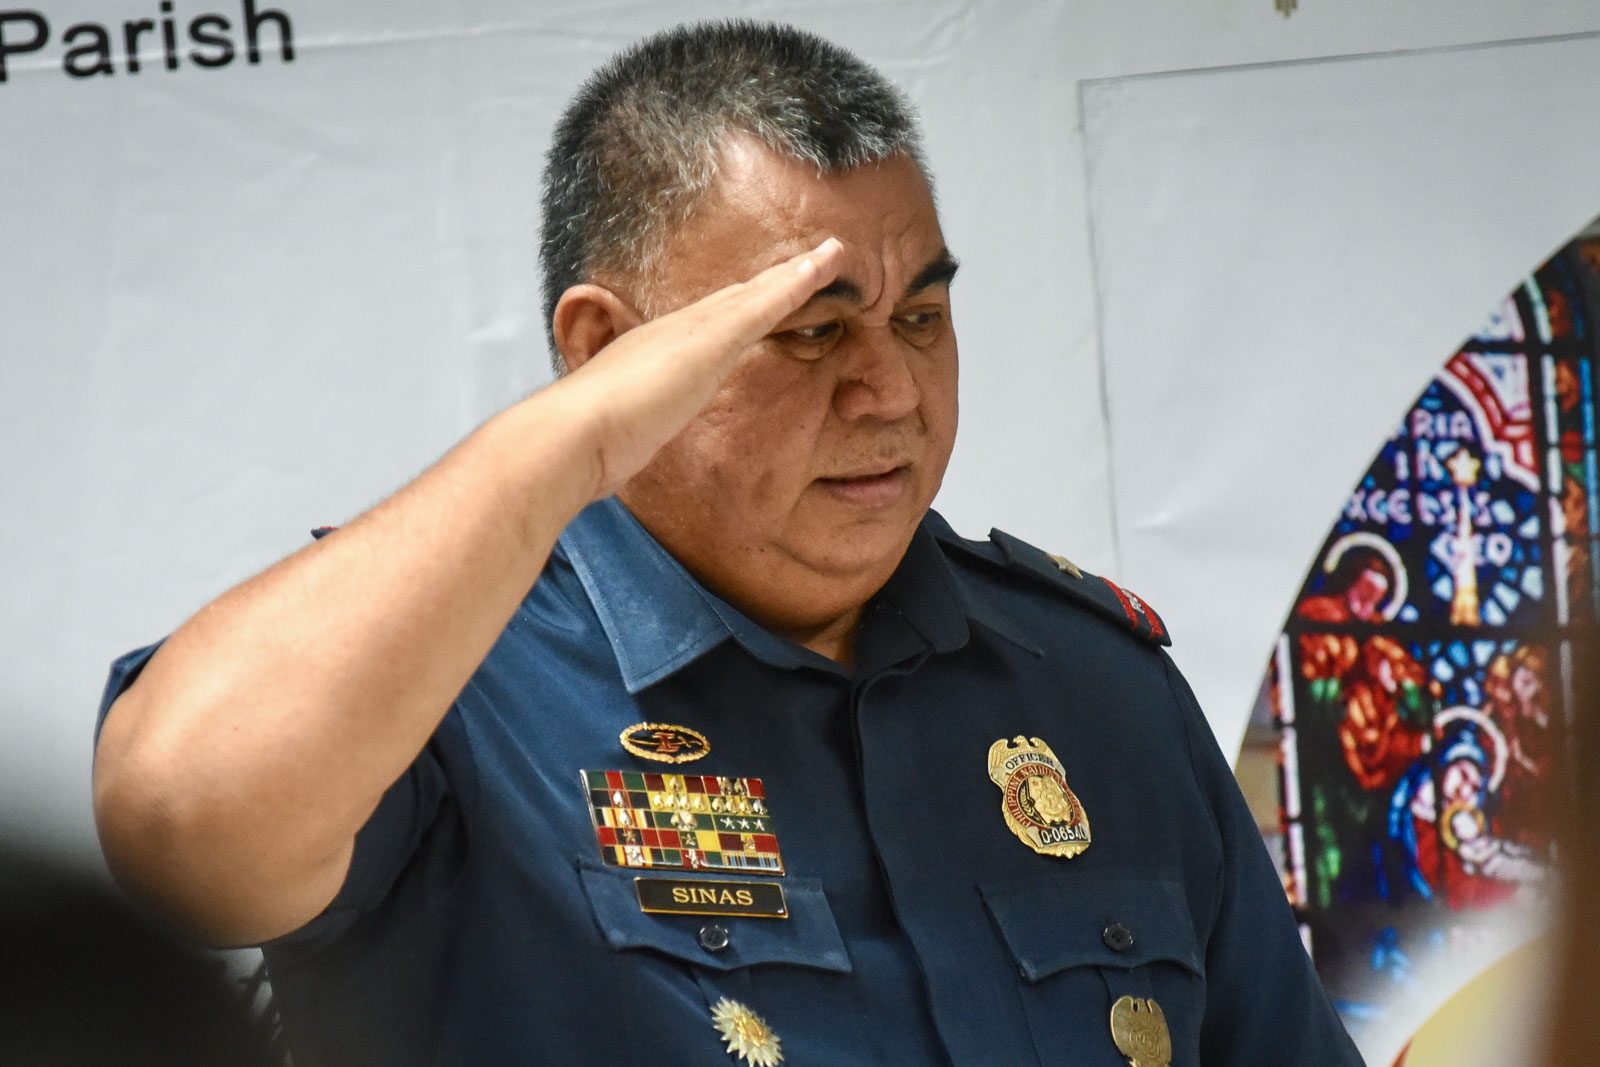 Obese Metro Manila cops ordered to lose weight, NCRPO chief Sinas to lead effort